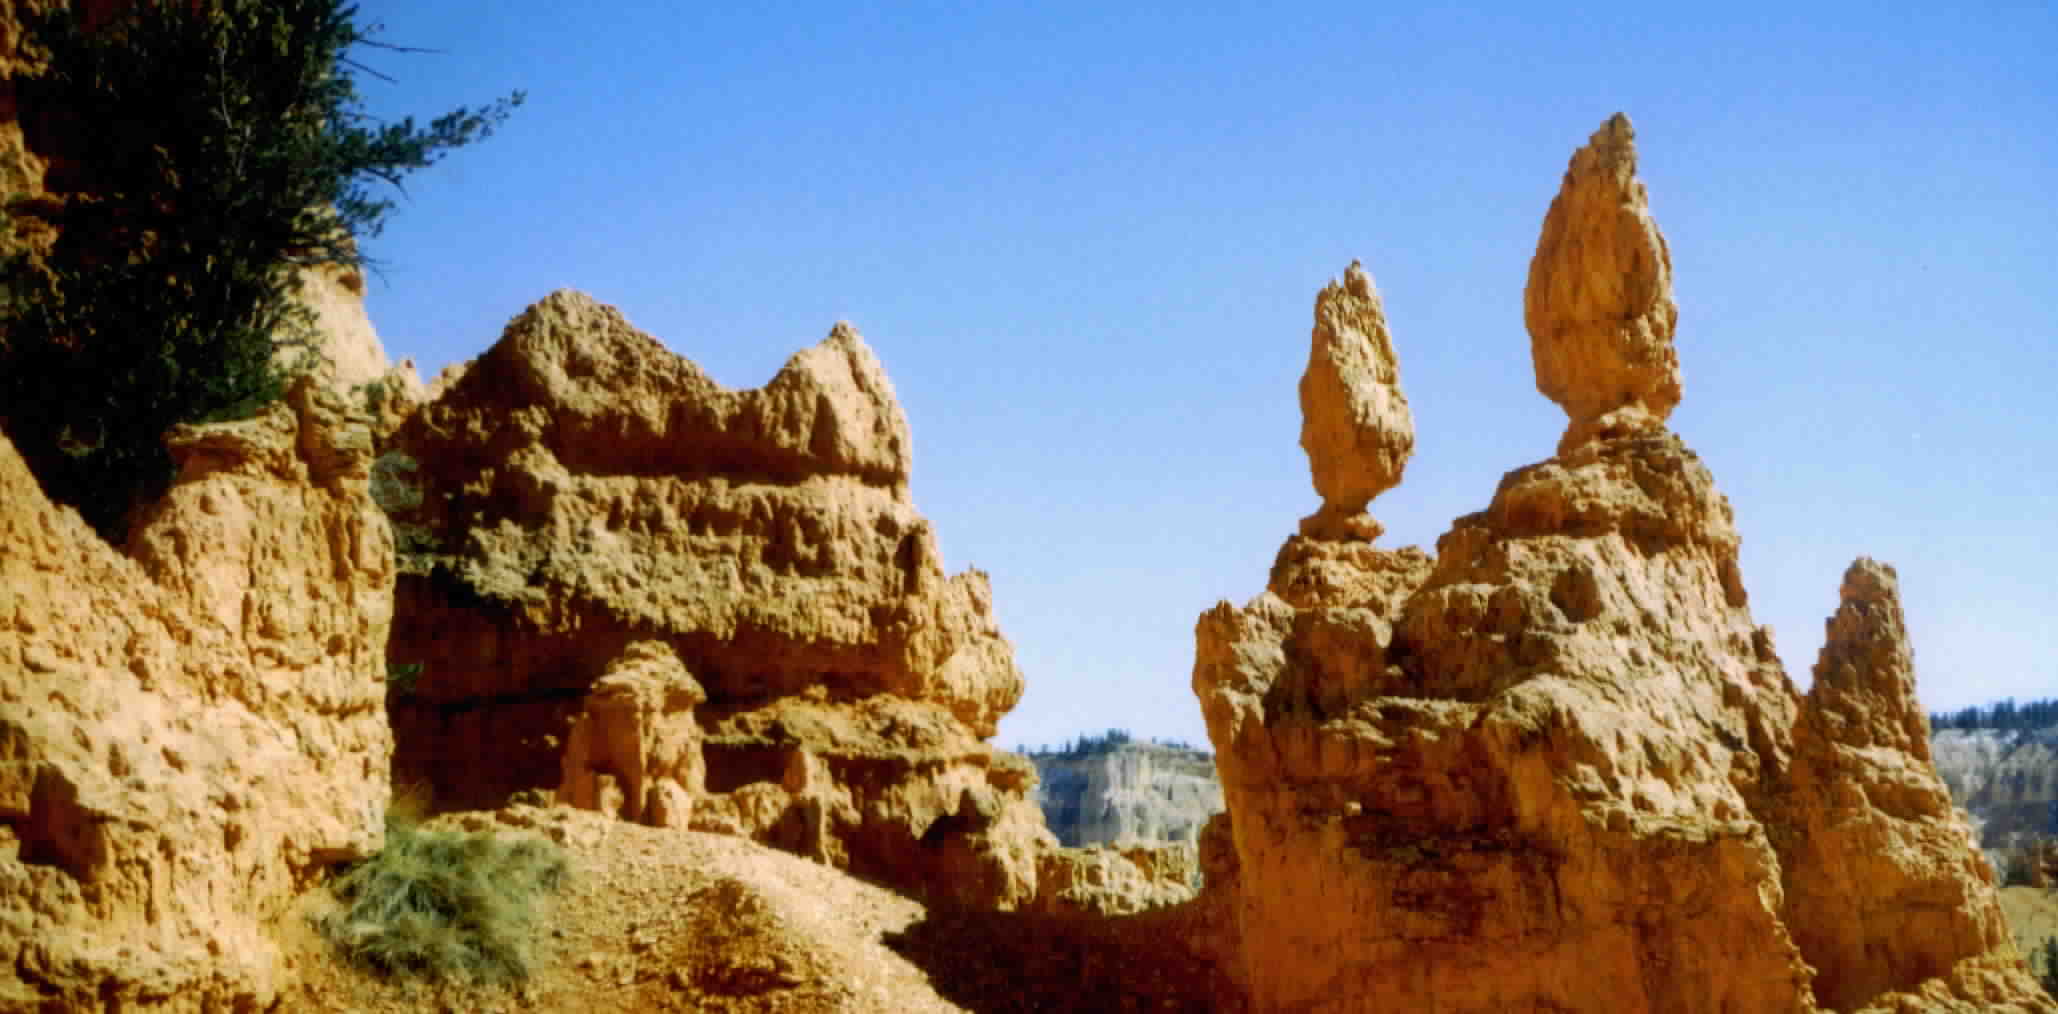 Hoodoos along the trail to
          Victoria's Garden, Bryce Canyon , UT